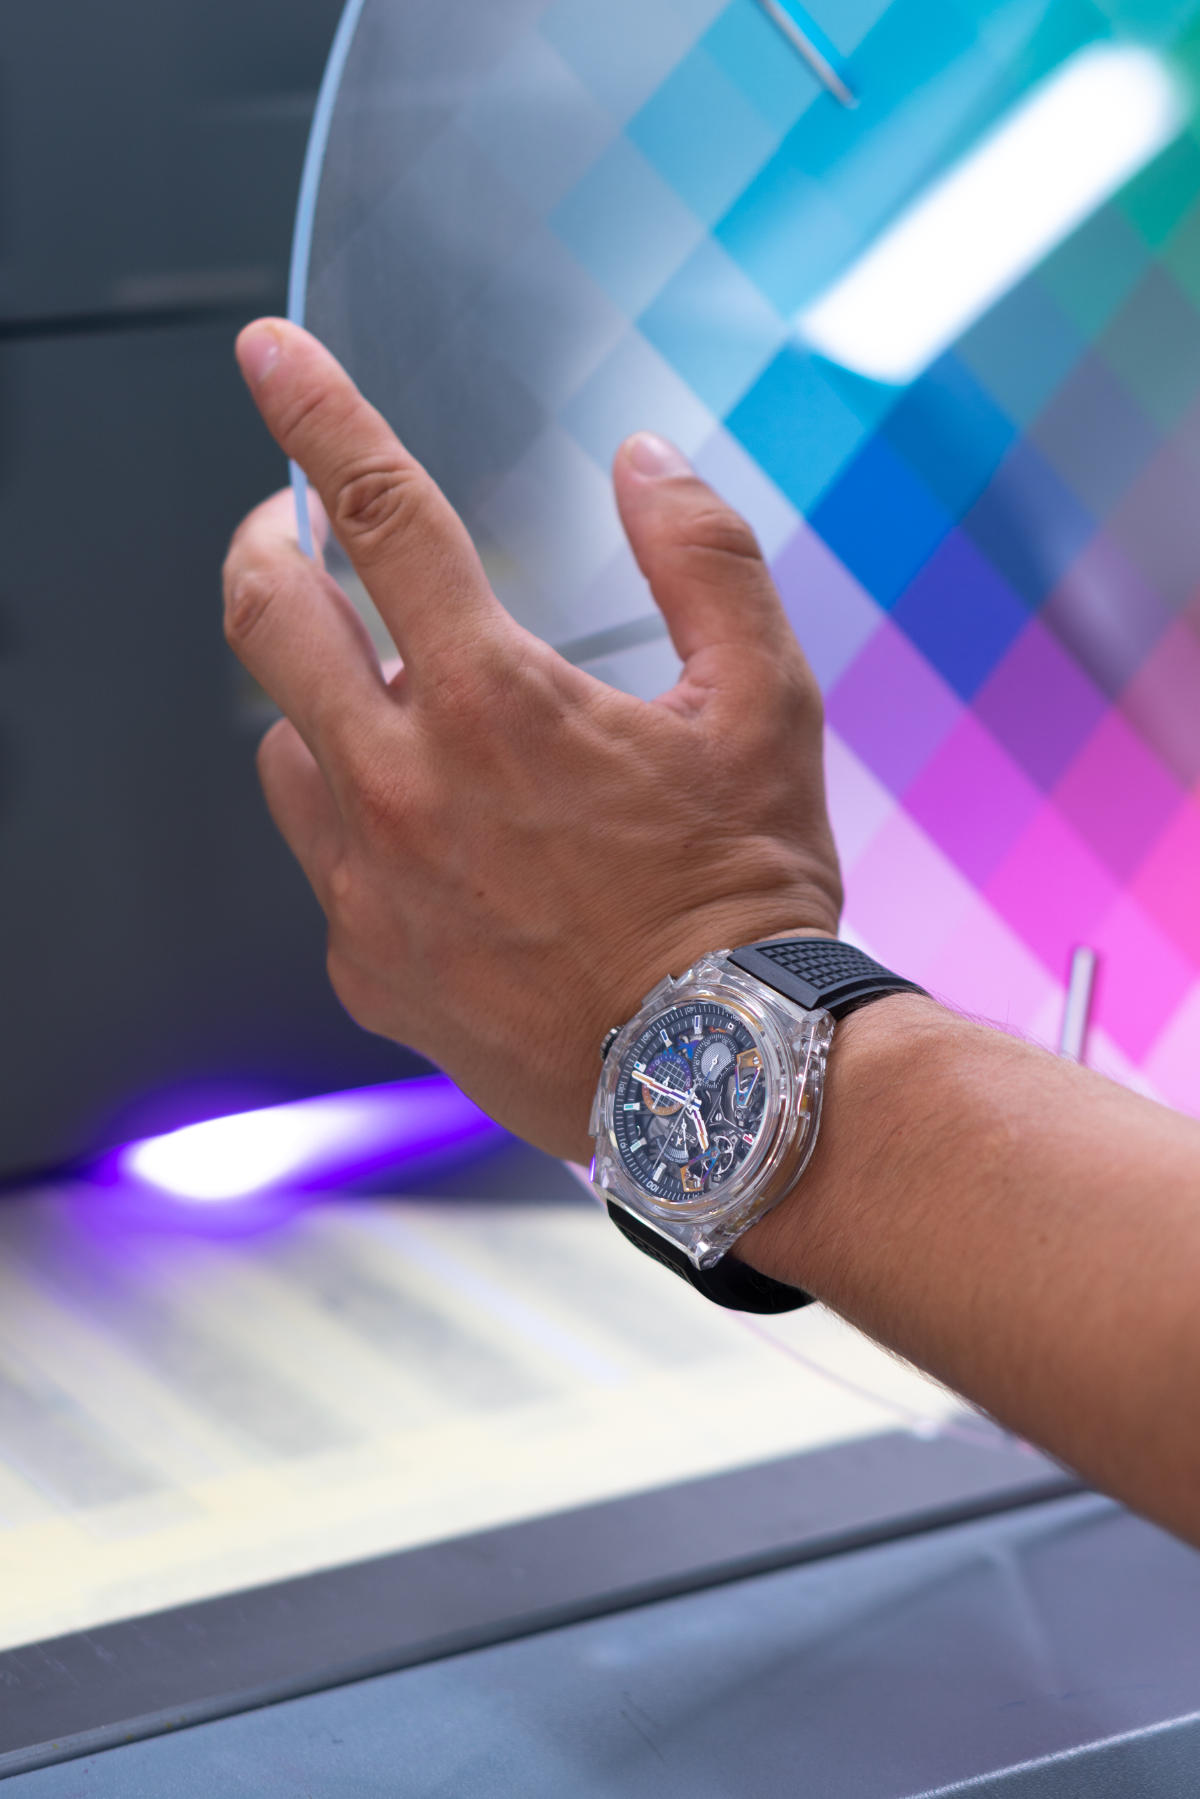 An Astounding Result For The Zenith X Felipe Pantone DEFY 21 Double Tourbillon At Only Watch 2021